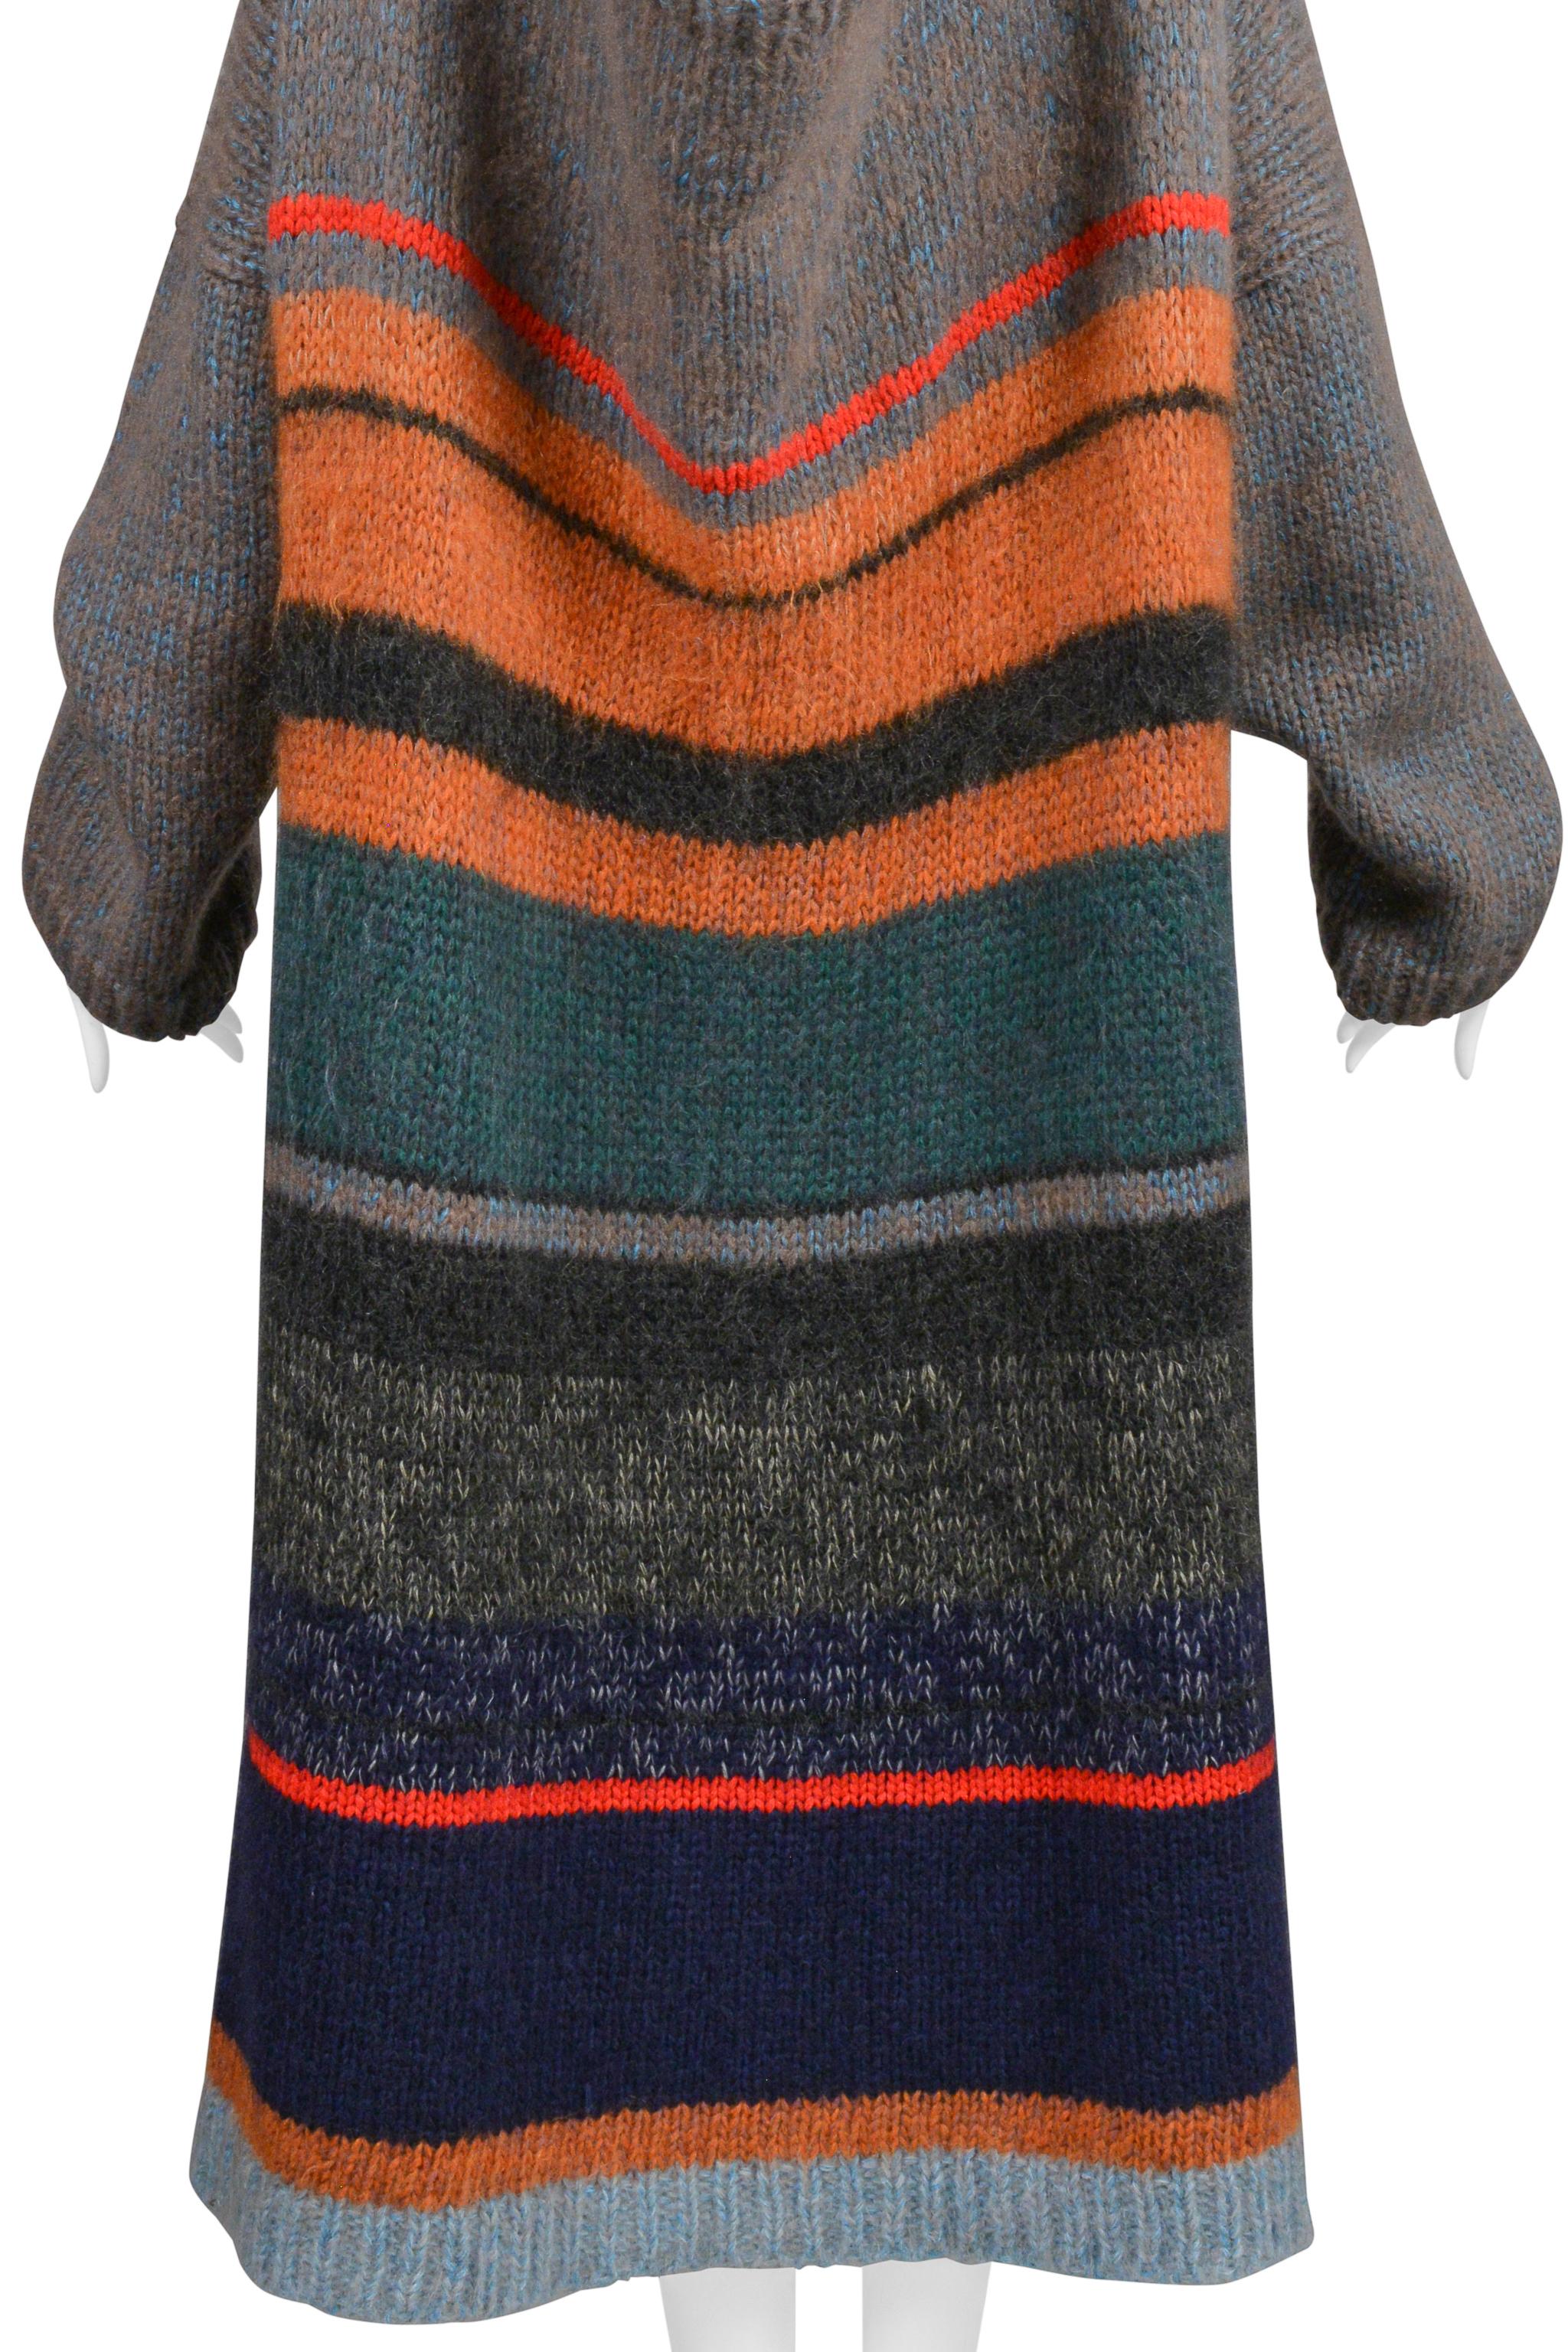 Resurrection Vintage is excited to present a vintage Yohji Yamamoto oversized mohair sweater featuring an open neckline, snap front, bold stripes, easy body and 3/4 length.
* Yohji Yamamoto
* Size: Medium 
* Laine Wool
* 1998 Collection 
* Excellent